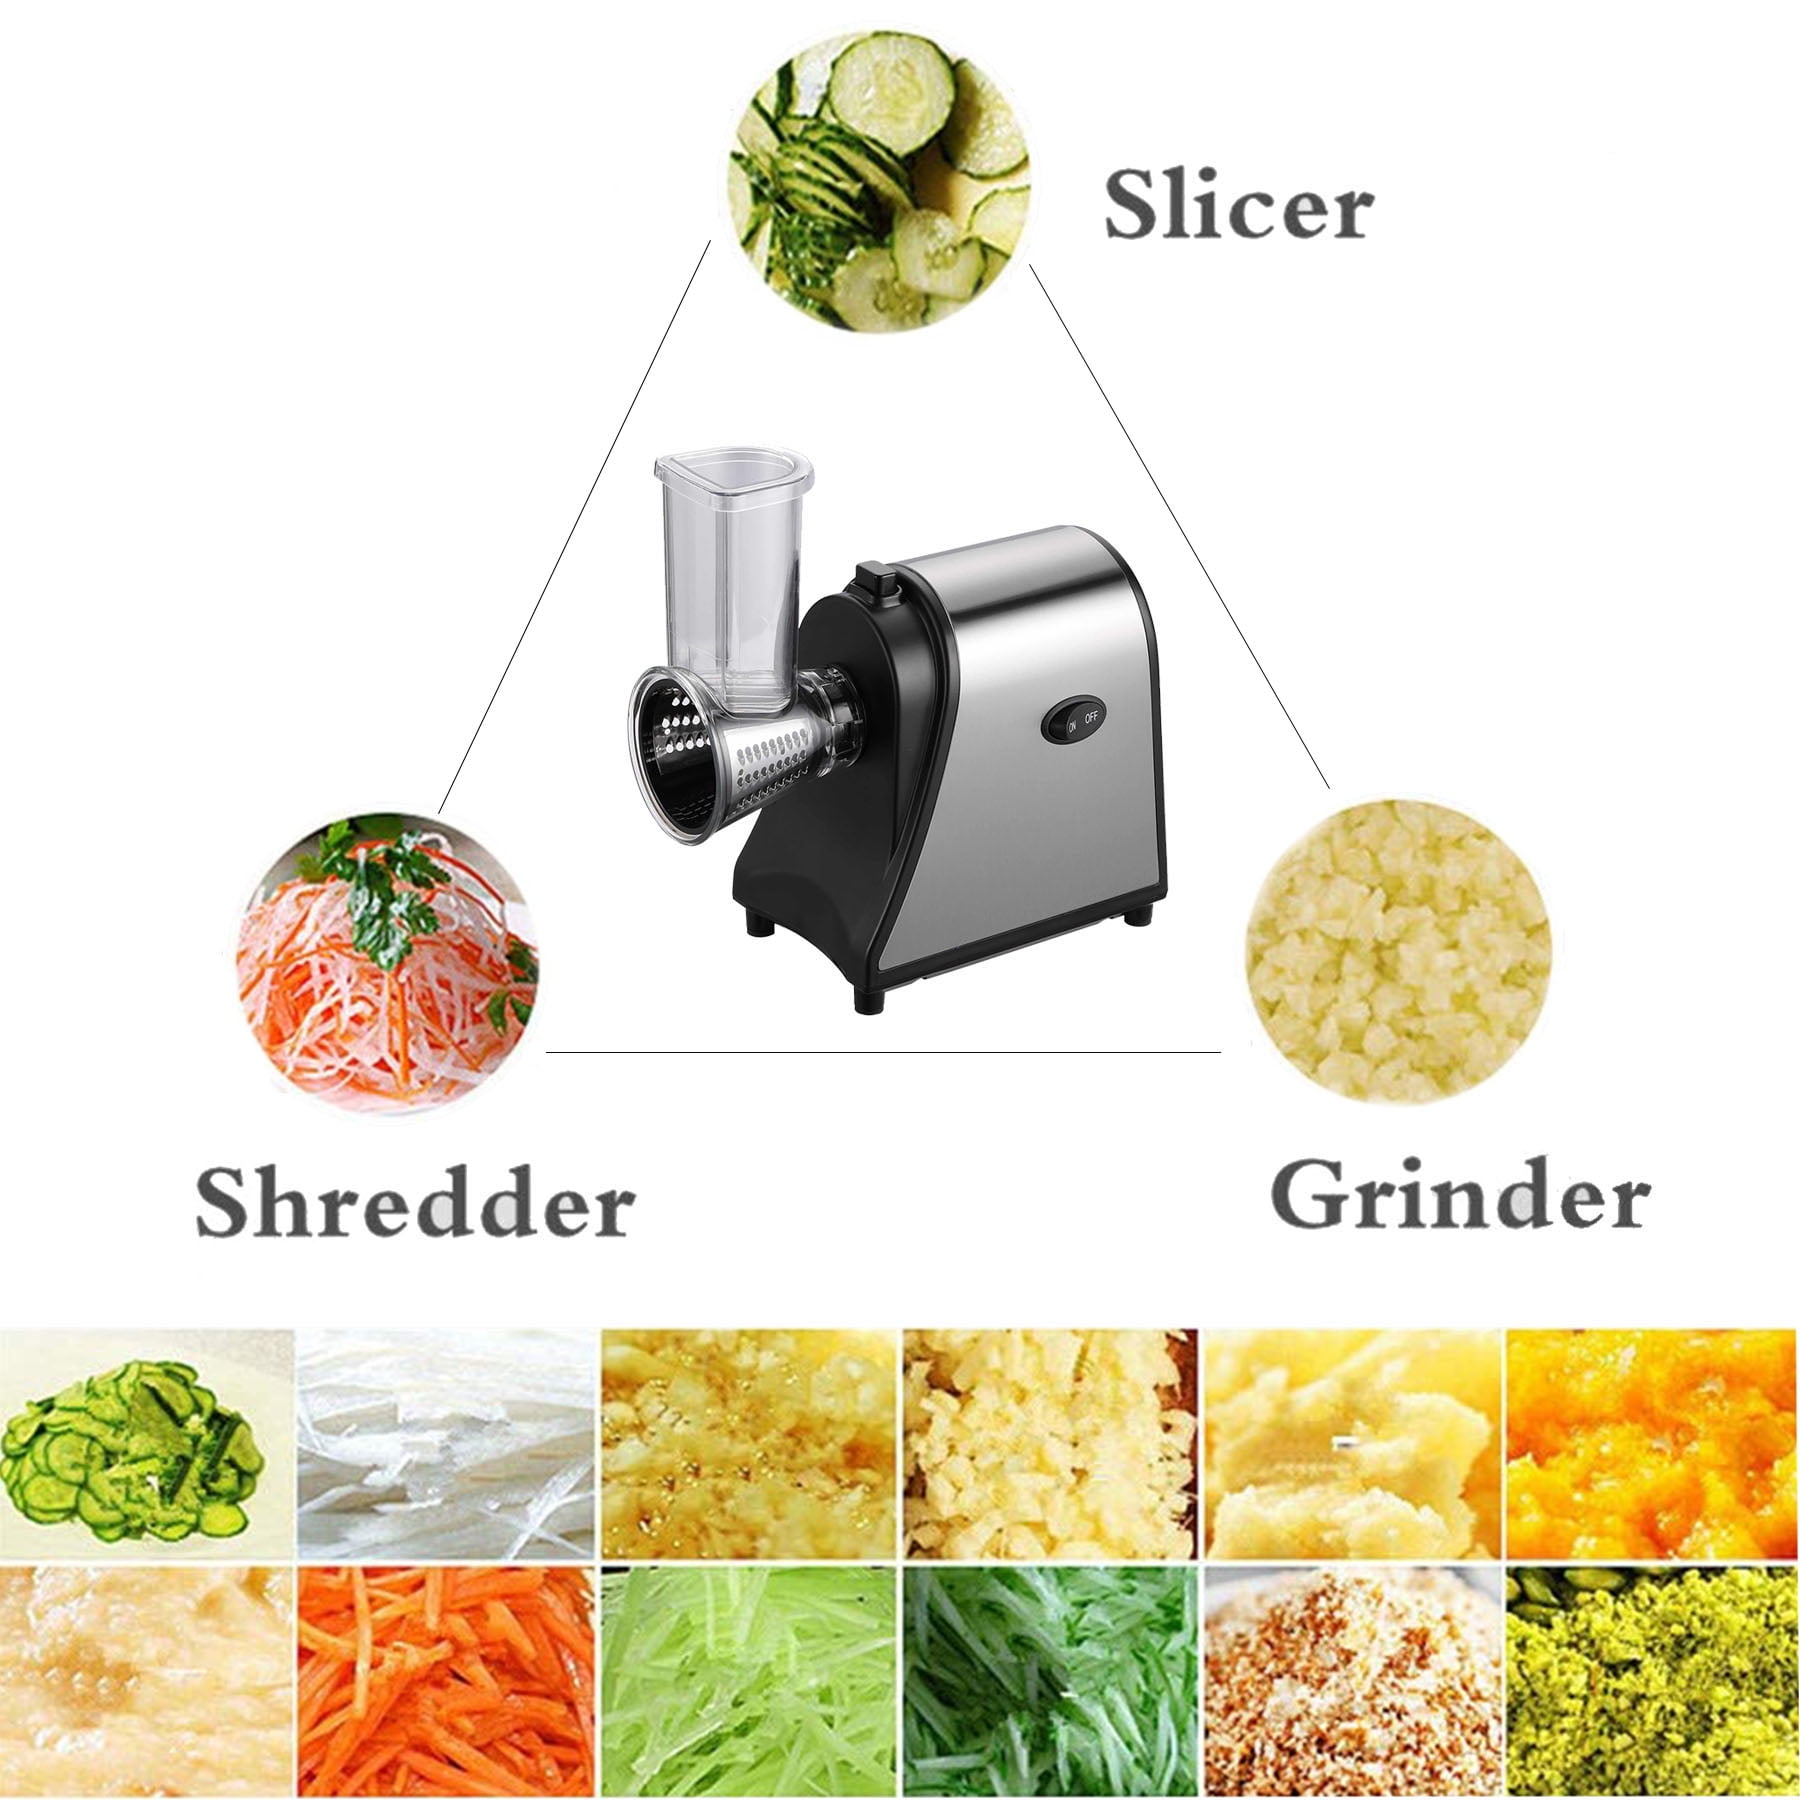 Homdox Electric Cheese Grater, Electric Slicer Shredder, 250W Salad Maker  Electric Grater/Shooter with 5 Free Attachments